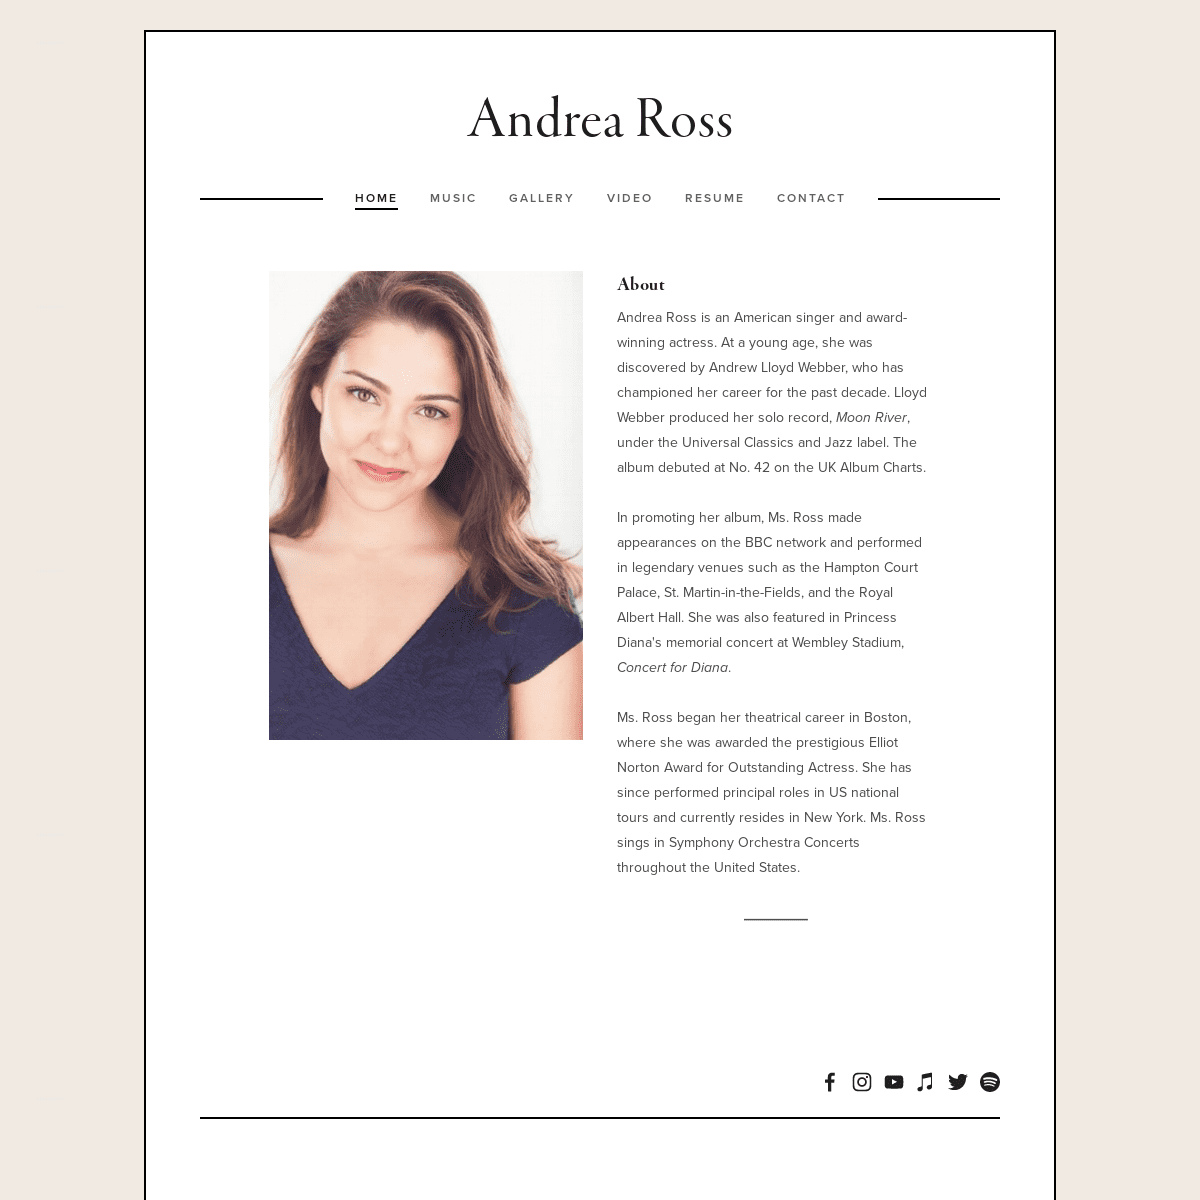 A complete backup of andreaross.com